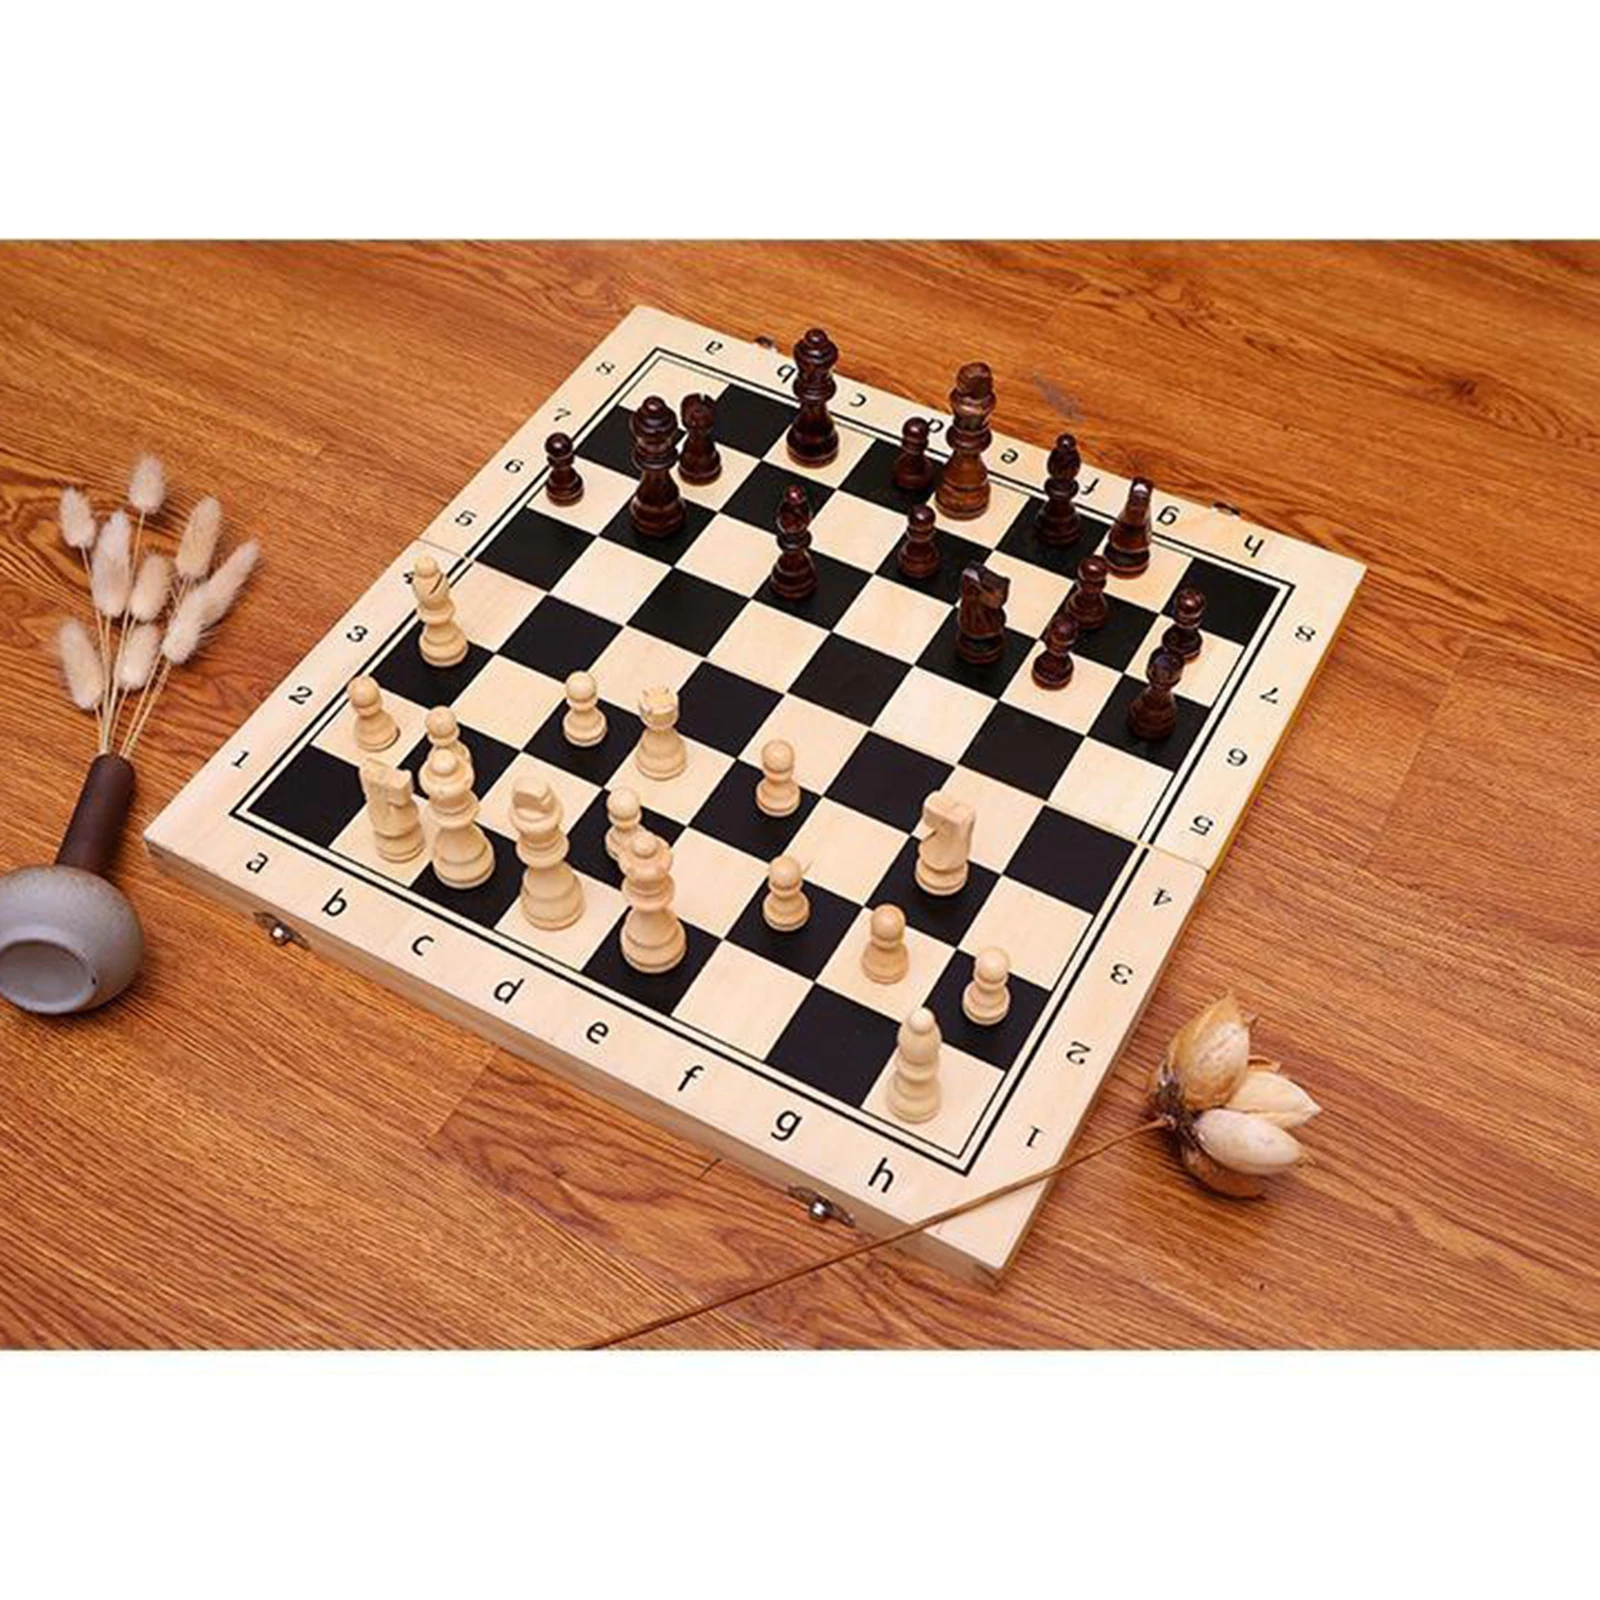 Wooden Folding Magnetic Chess Board Set 29x29cm Interior Storage Family Game handmade antique style